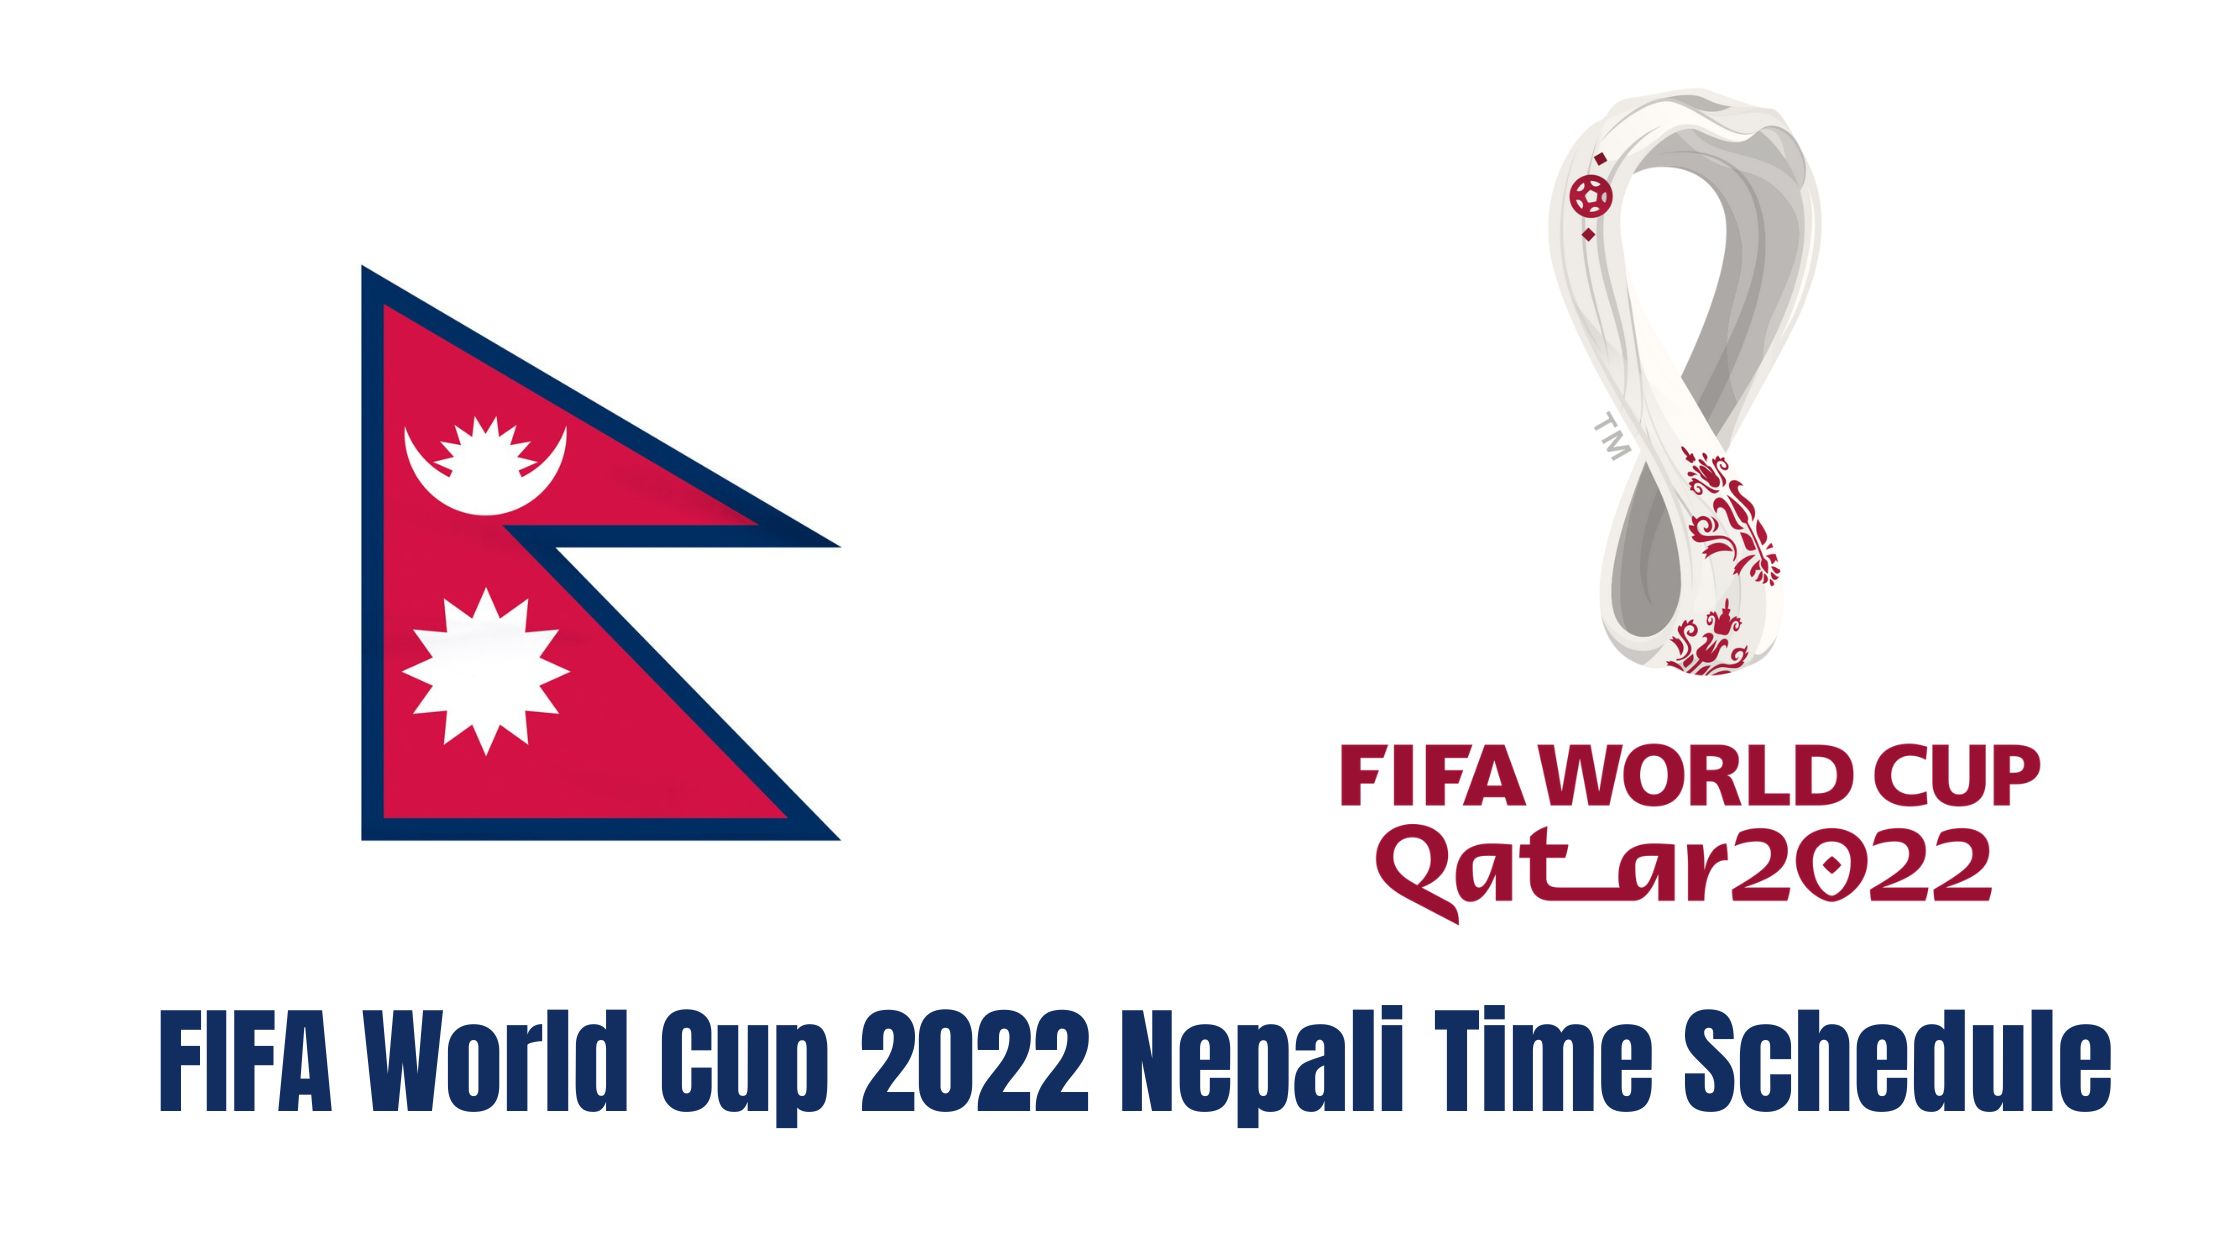 FIFA World Cup 2022 Nepali Time Schedule [ Complete Fixture Dates